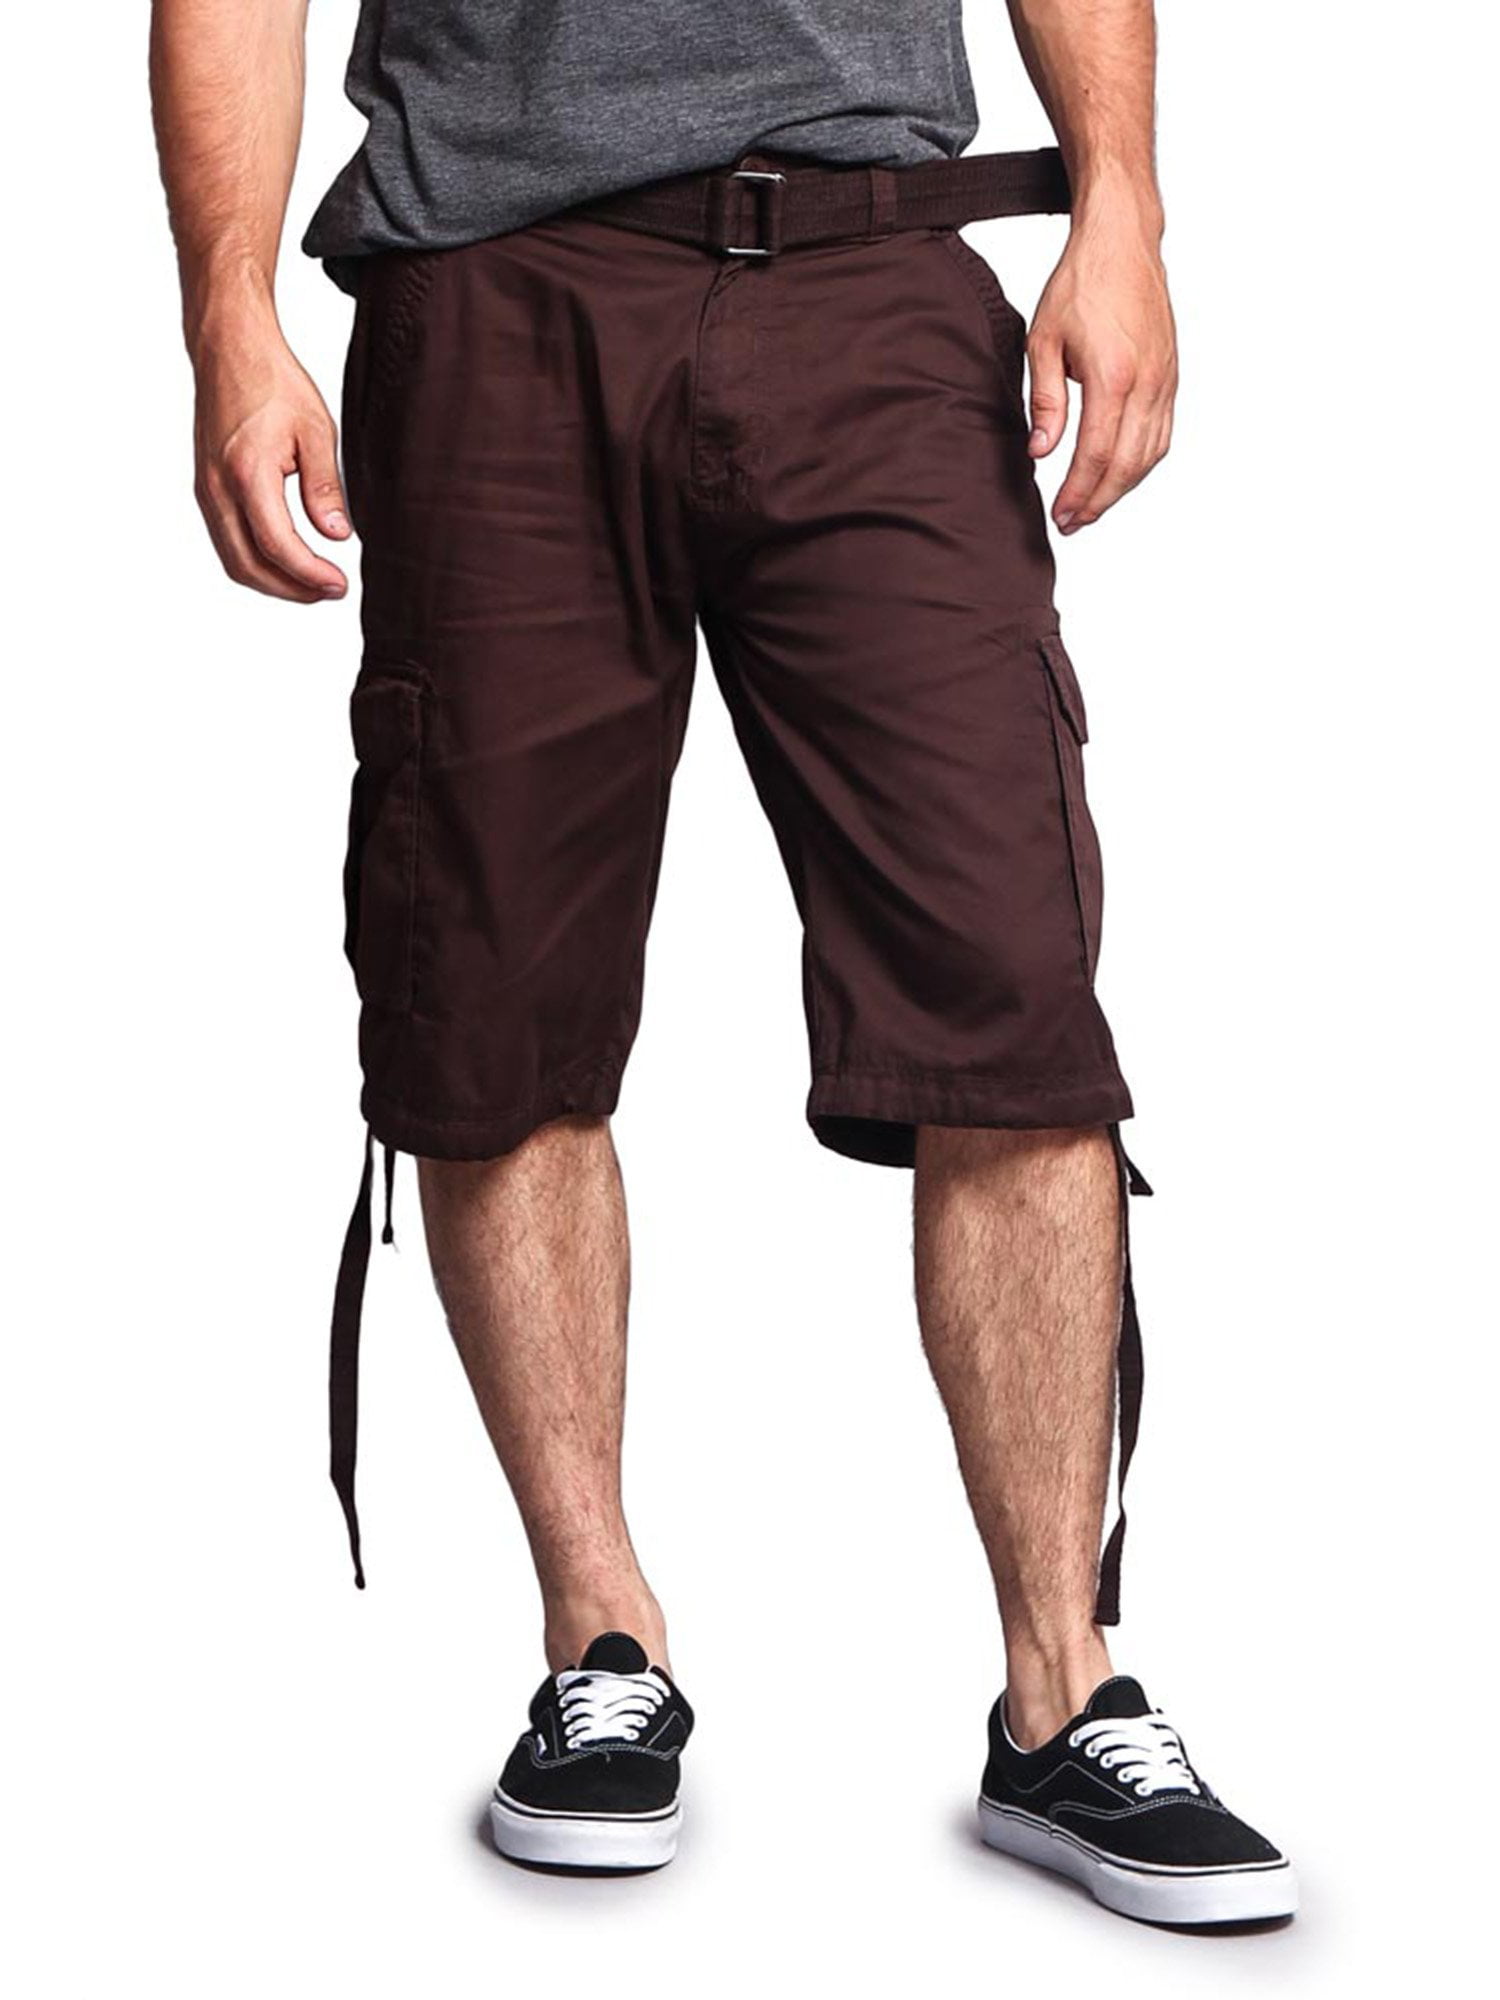 G-Style USA Men's Rip-Stop Belted Cargo Shorts - Walmart.com